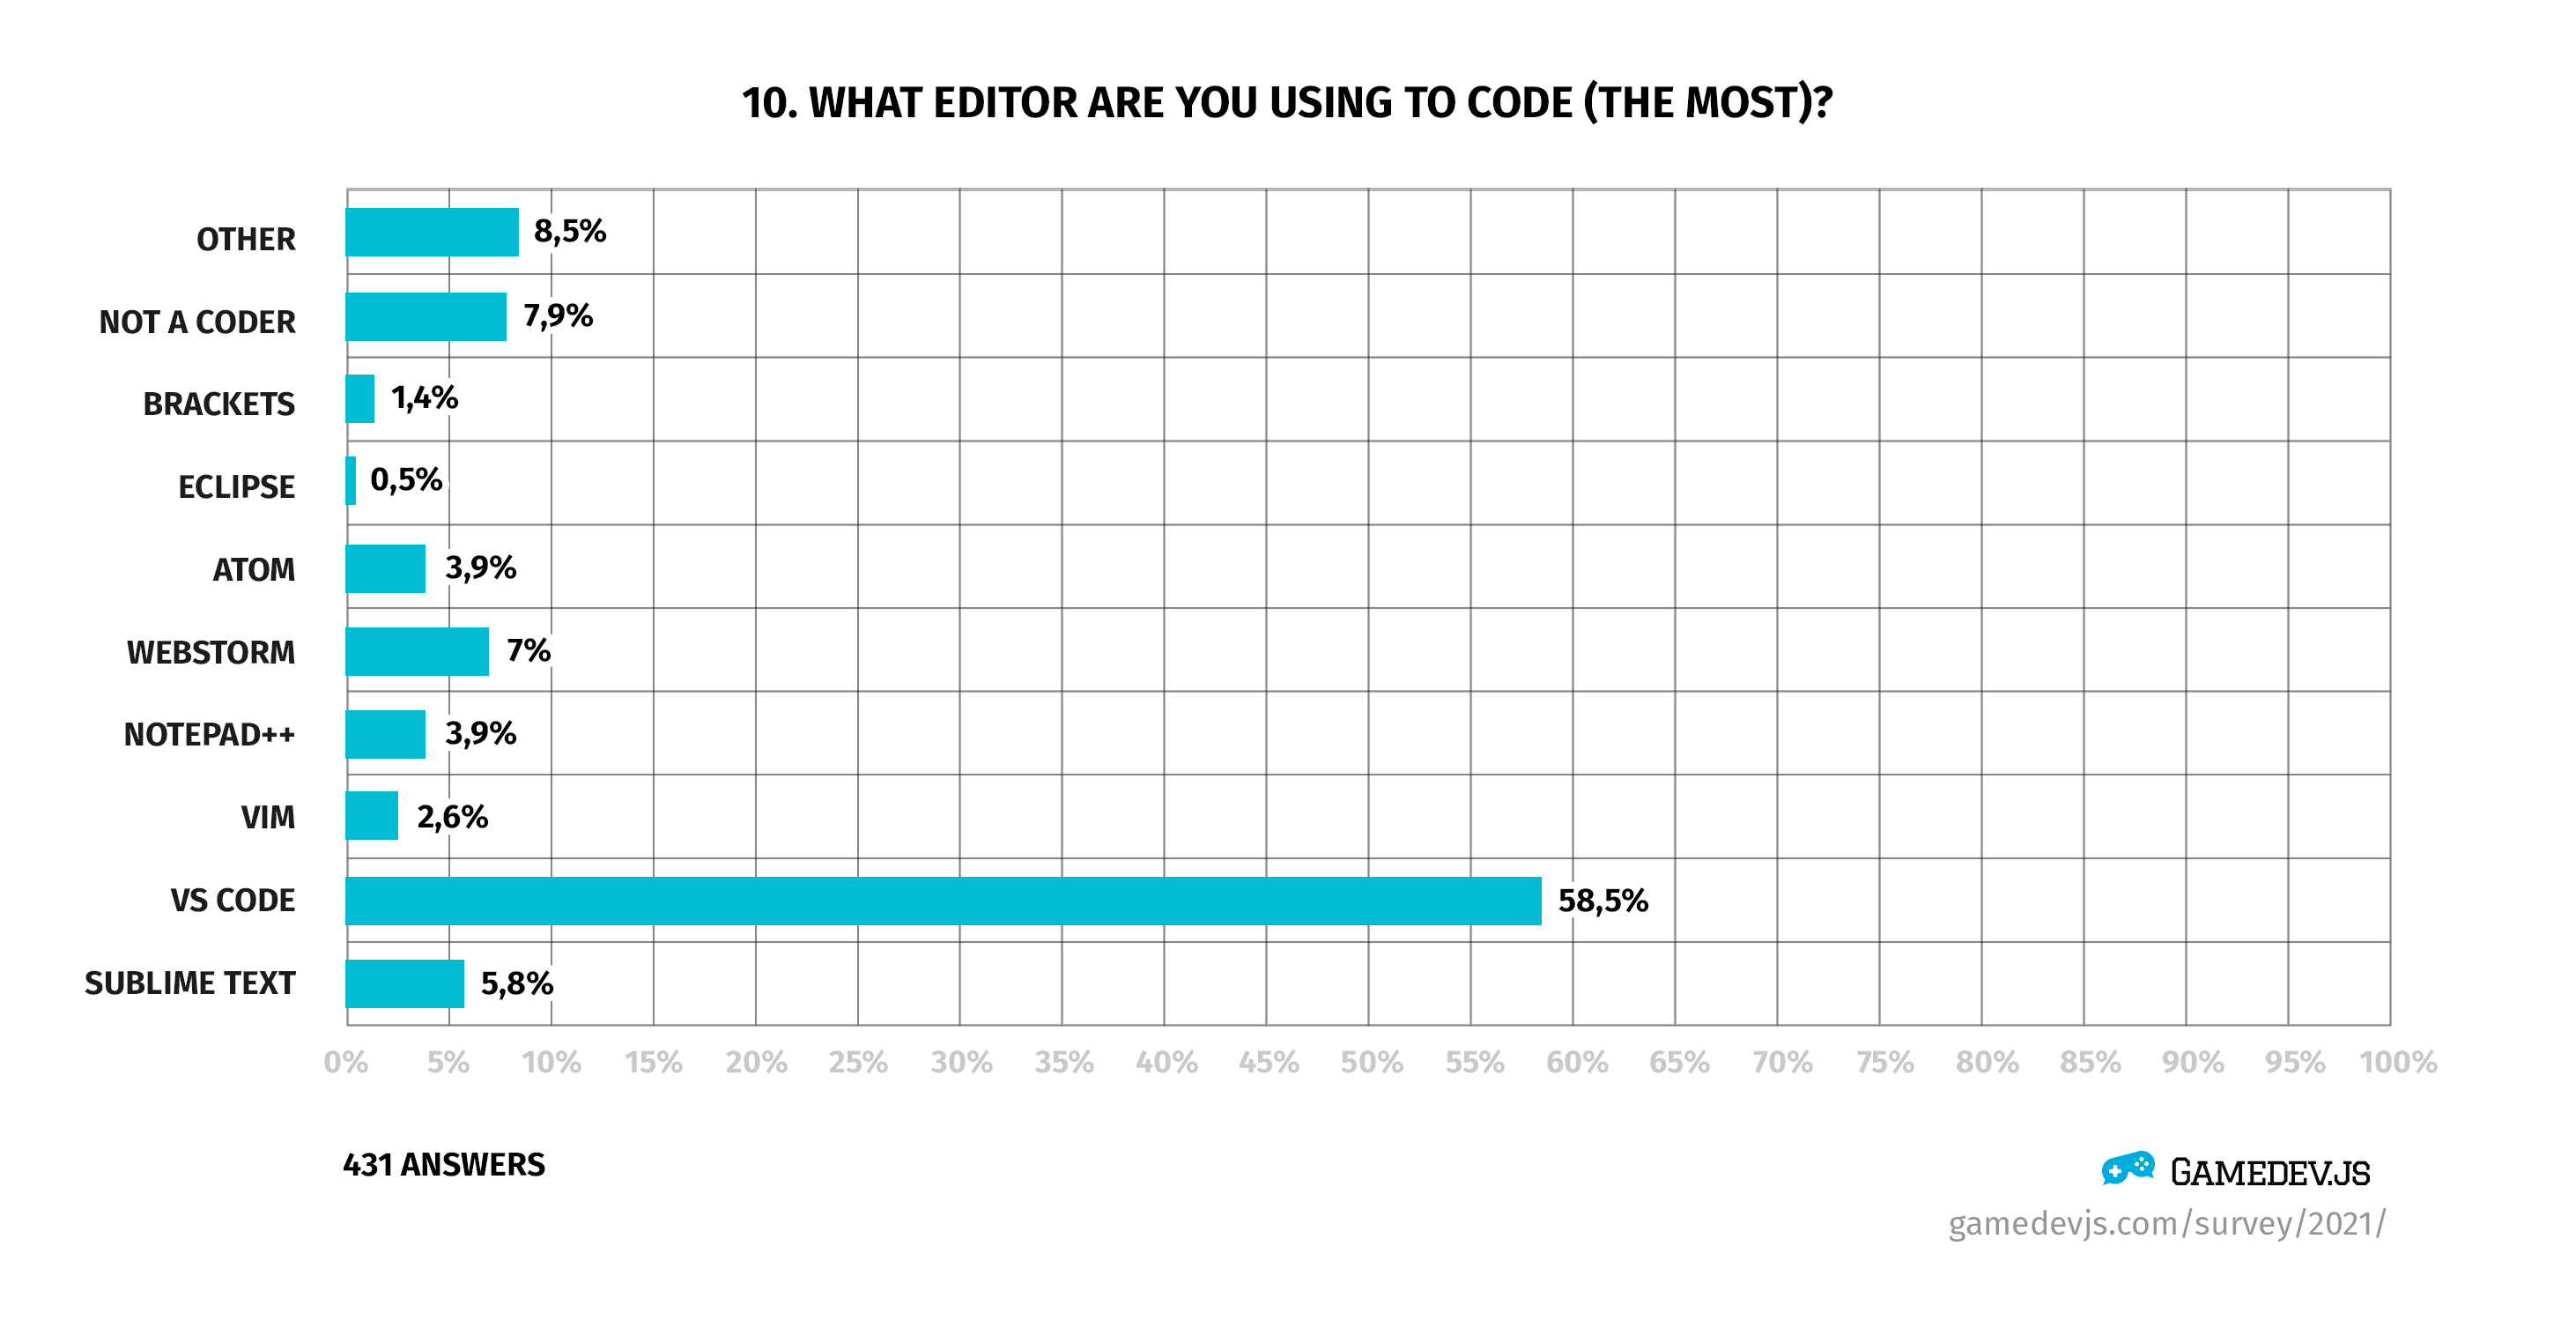 Gamedev.js Survey 2021 - Question #10: What editor are you using to code (the most)?